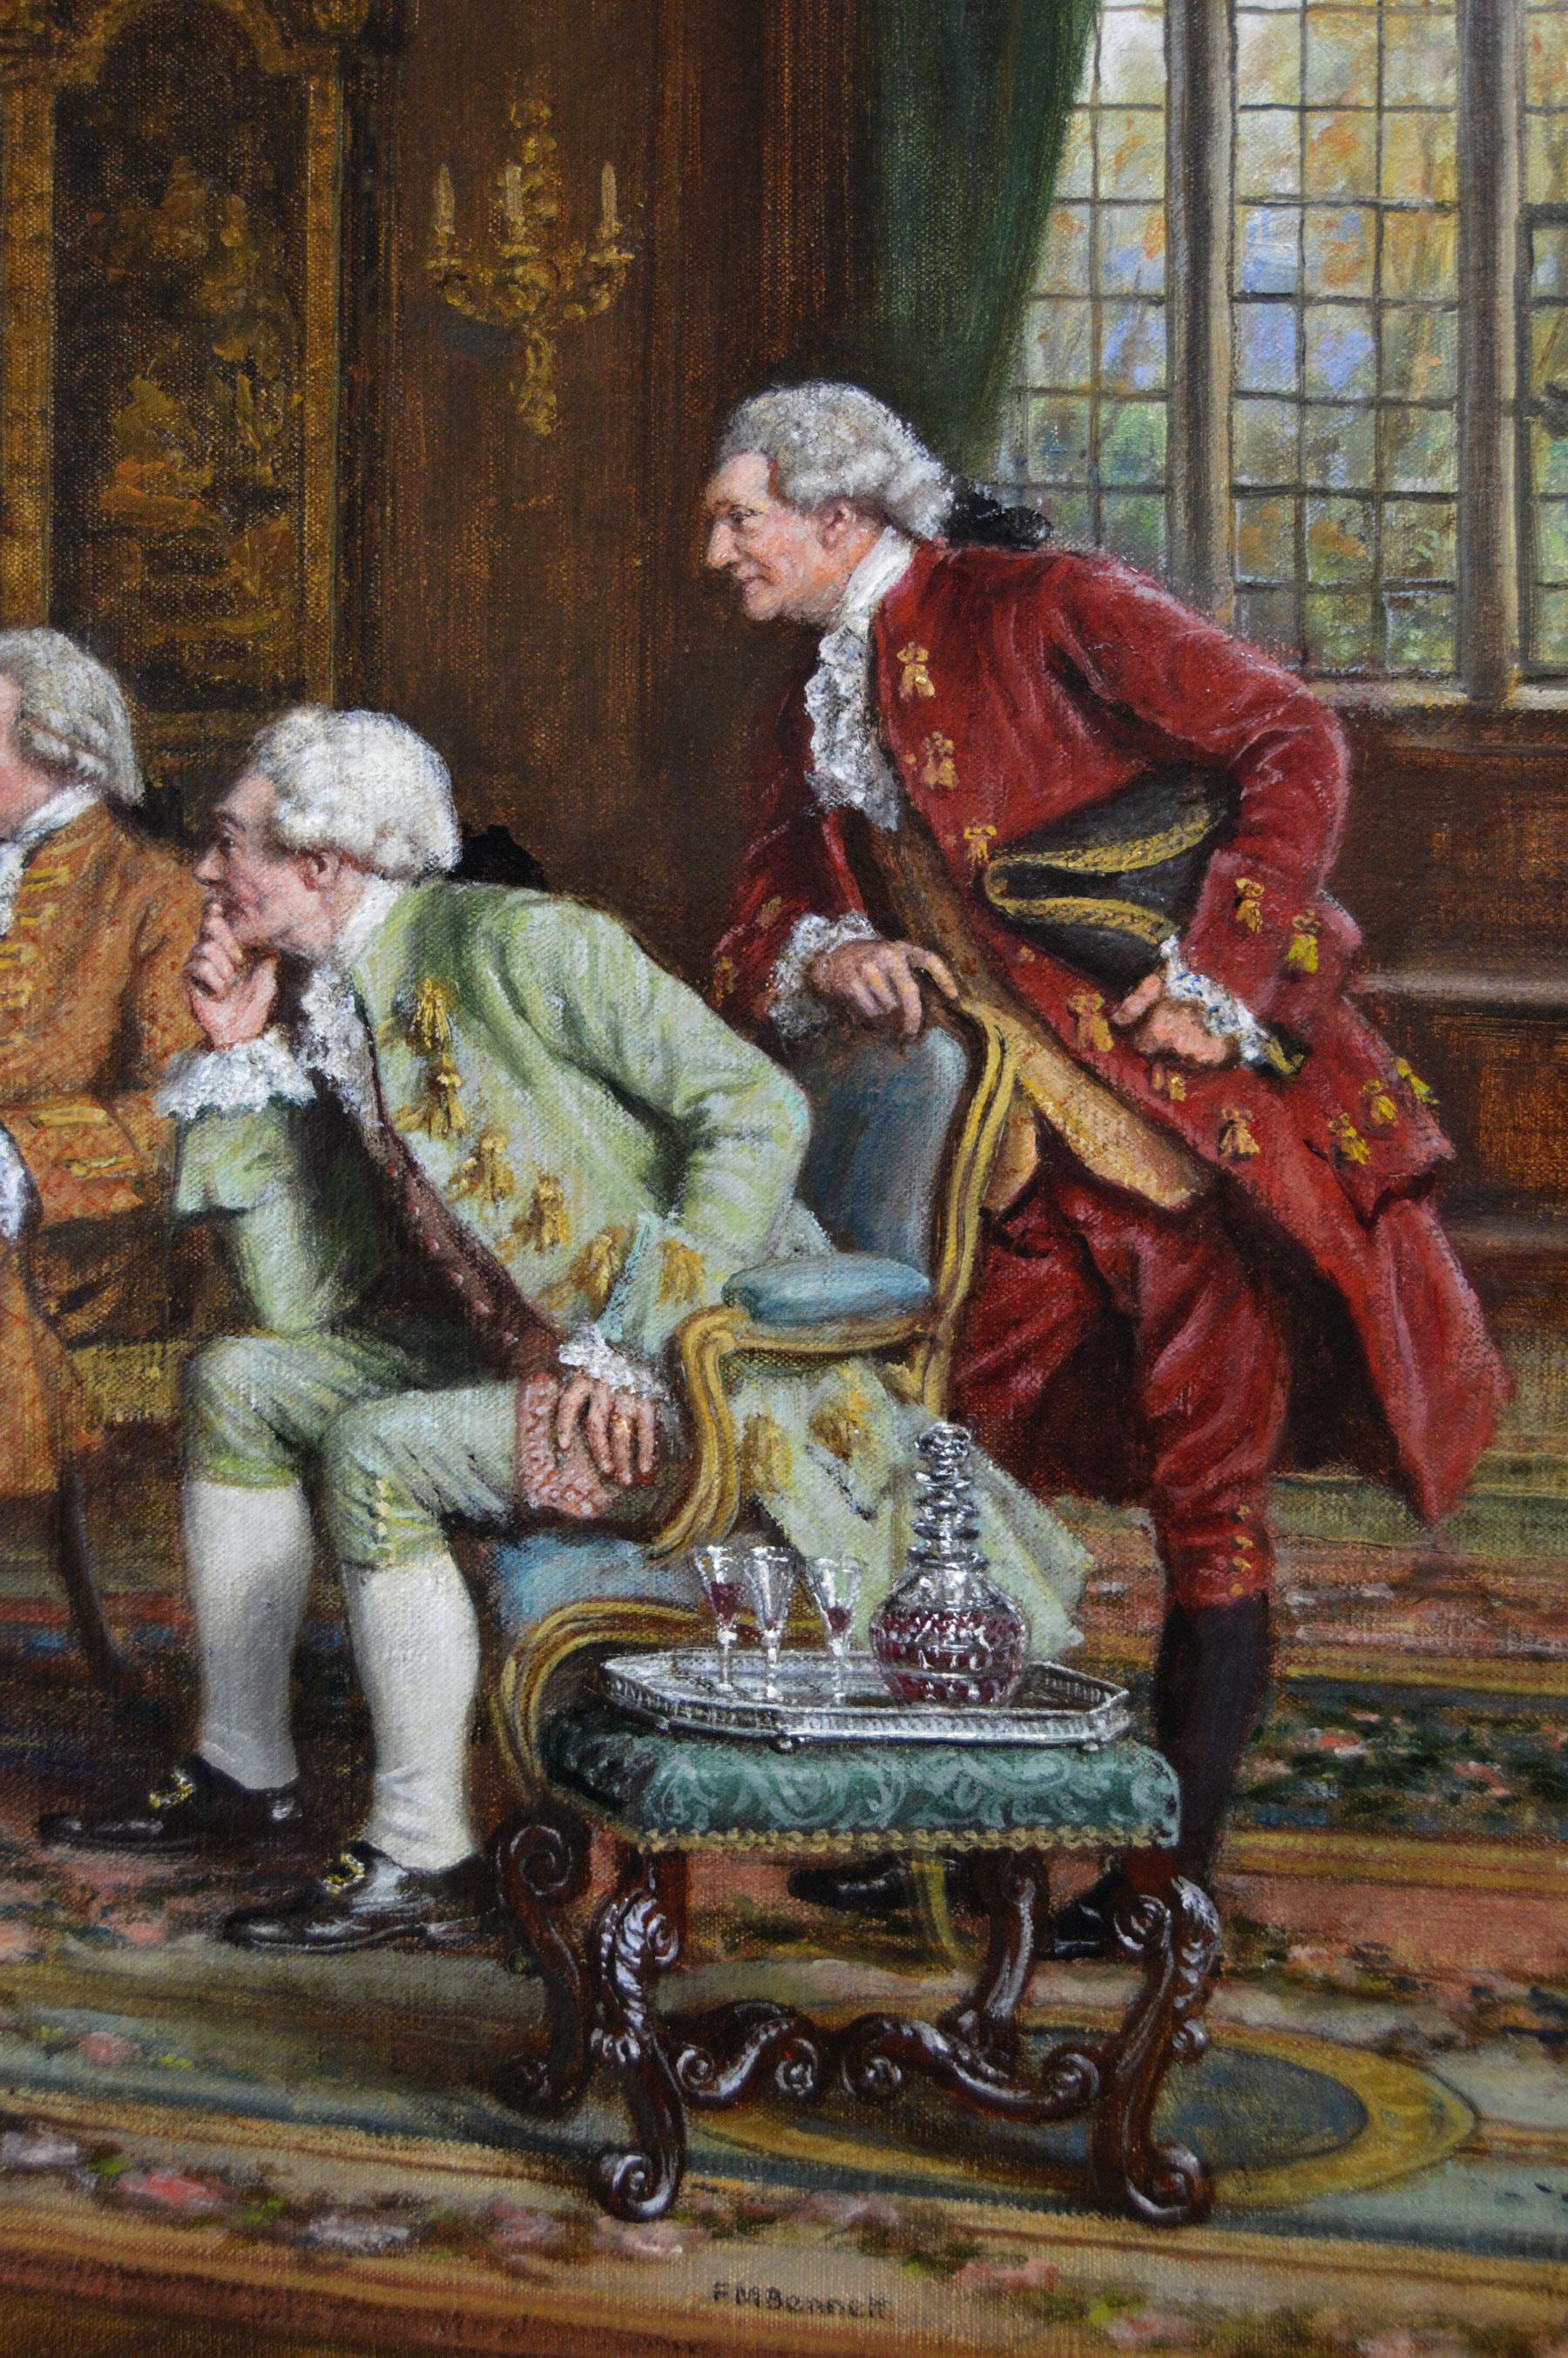 Frank Moss Bennett
British, (1874-1952)
A Musical Interlude
Oil on canvas, signed
Image size: 23.5 inches x 29.5 inches 
Size including frame: 29.75 inches x 35.75 inches

A wonderful genre painting of a group of gentlemen in 18th century costume